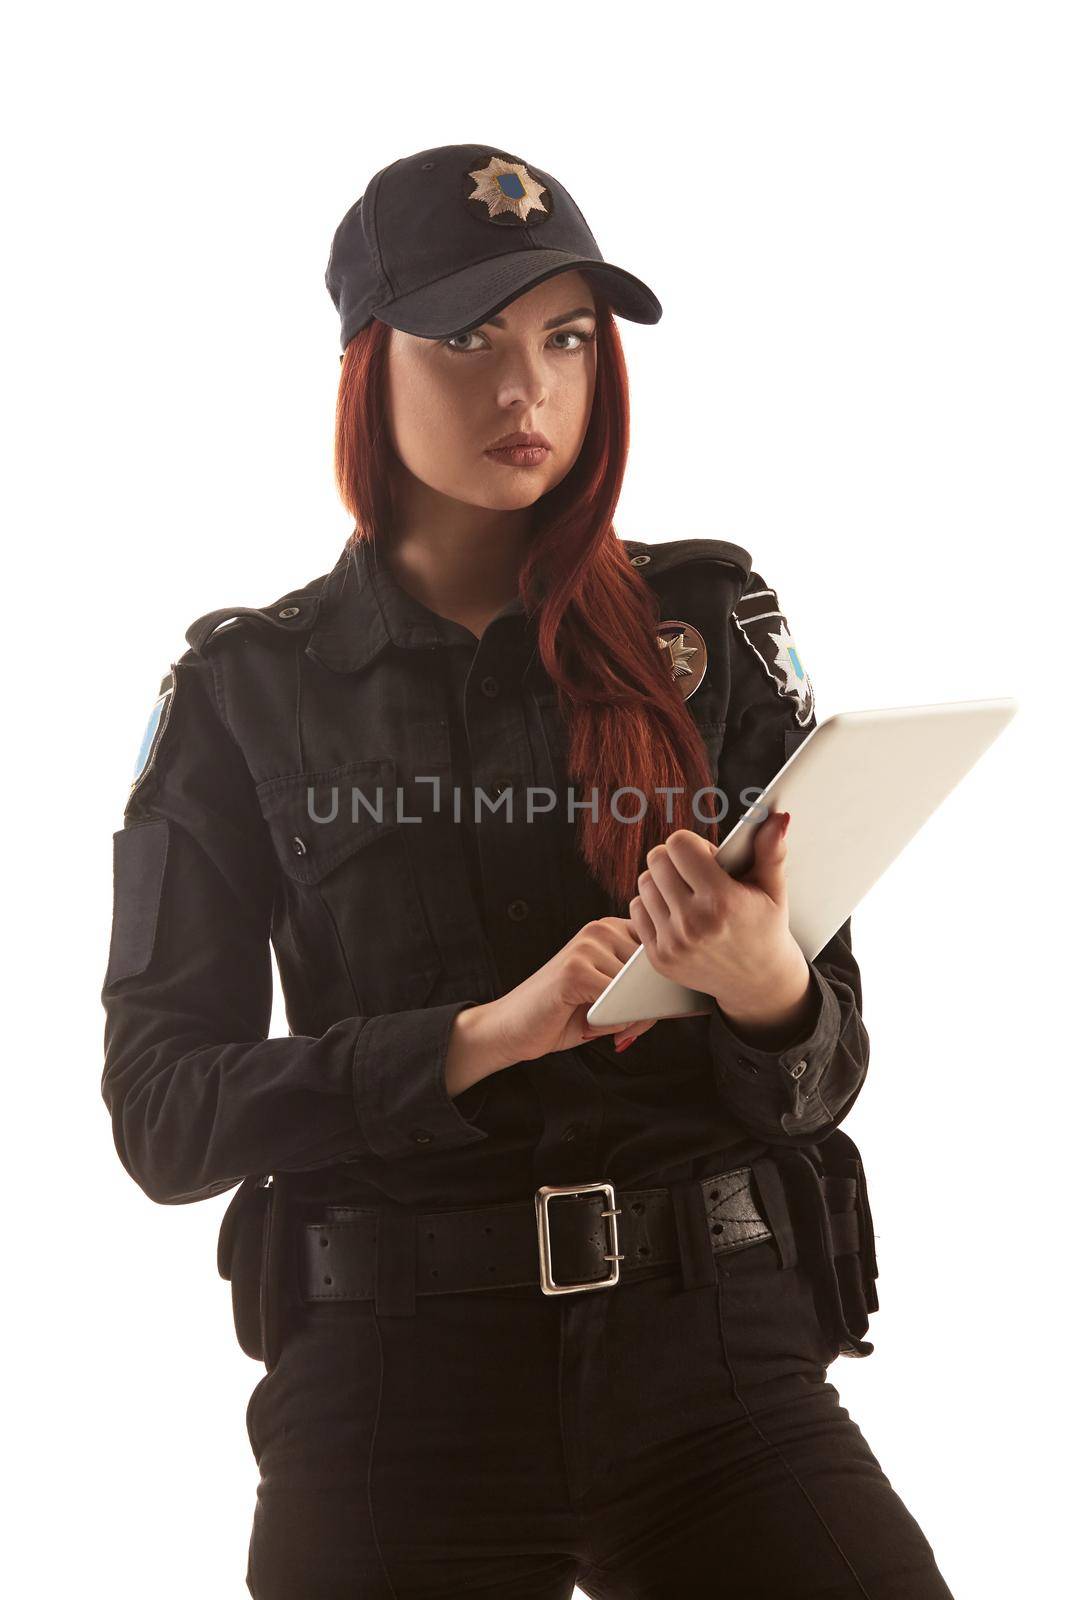 Sexy redheaded policewoman in a black uniform and a cap is holding a tablet in her arms and looking at the camera, isolated on white background. Defender of citizens is ready to enforce a law and stop a crime.